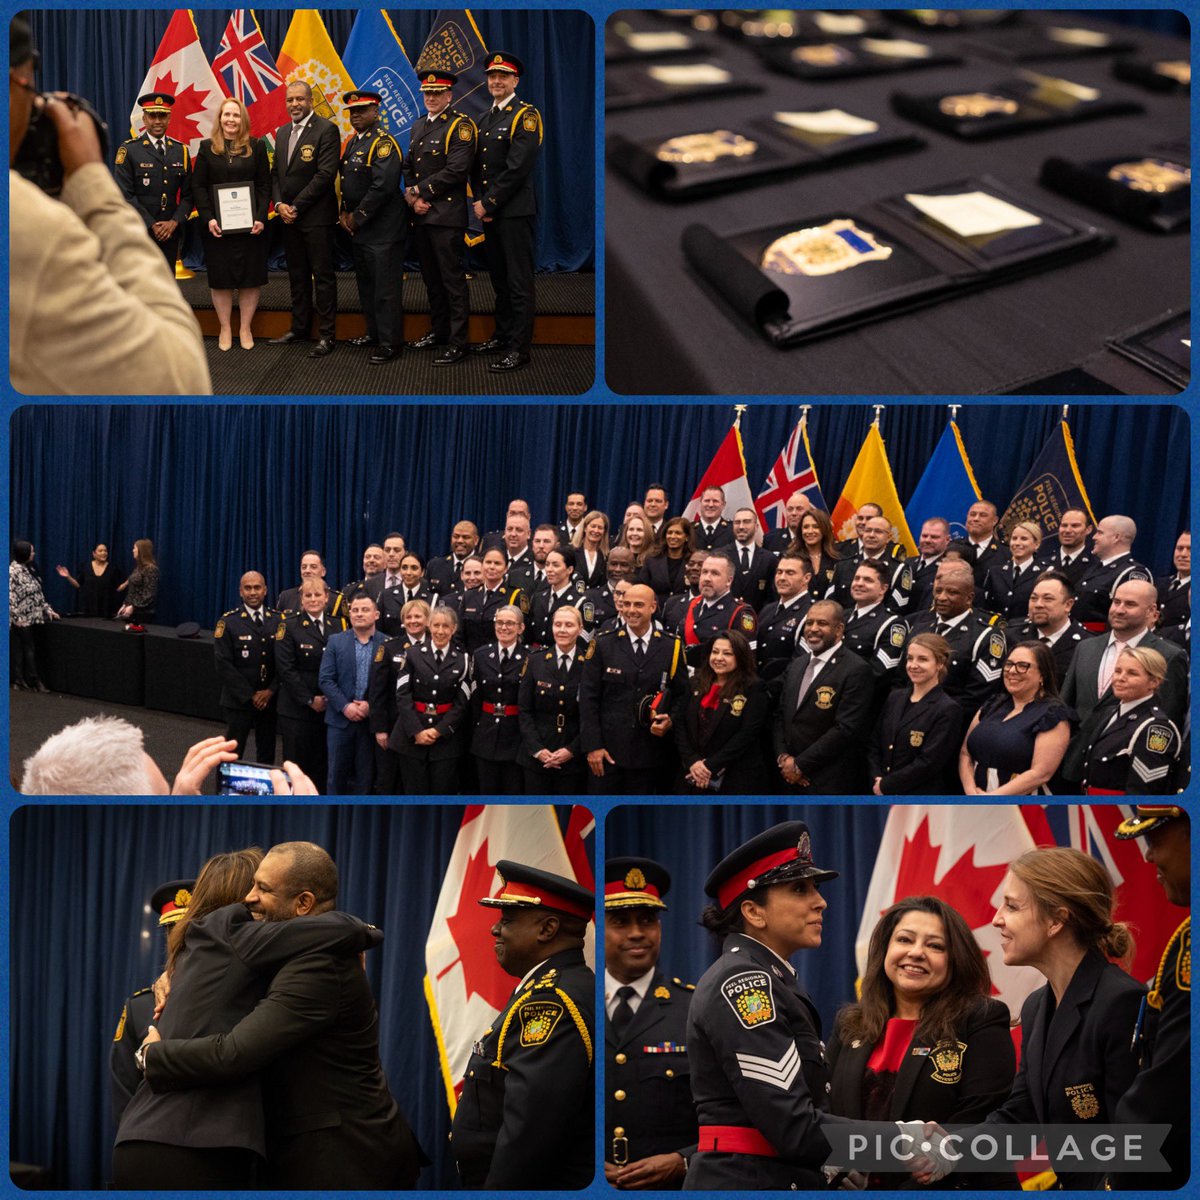 Congrats to the 70+ civilian professional & officers celebrating their new promotions w/@PeelPolice. We are lucky to have such outstanding members & leaders that possess great integrity and bring a incredible value to our organization and their respective teams.